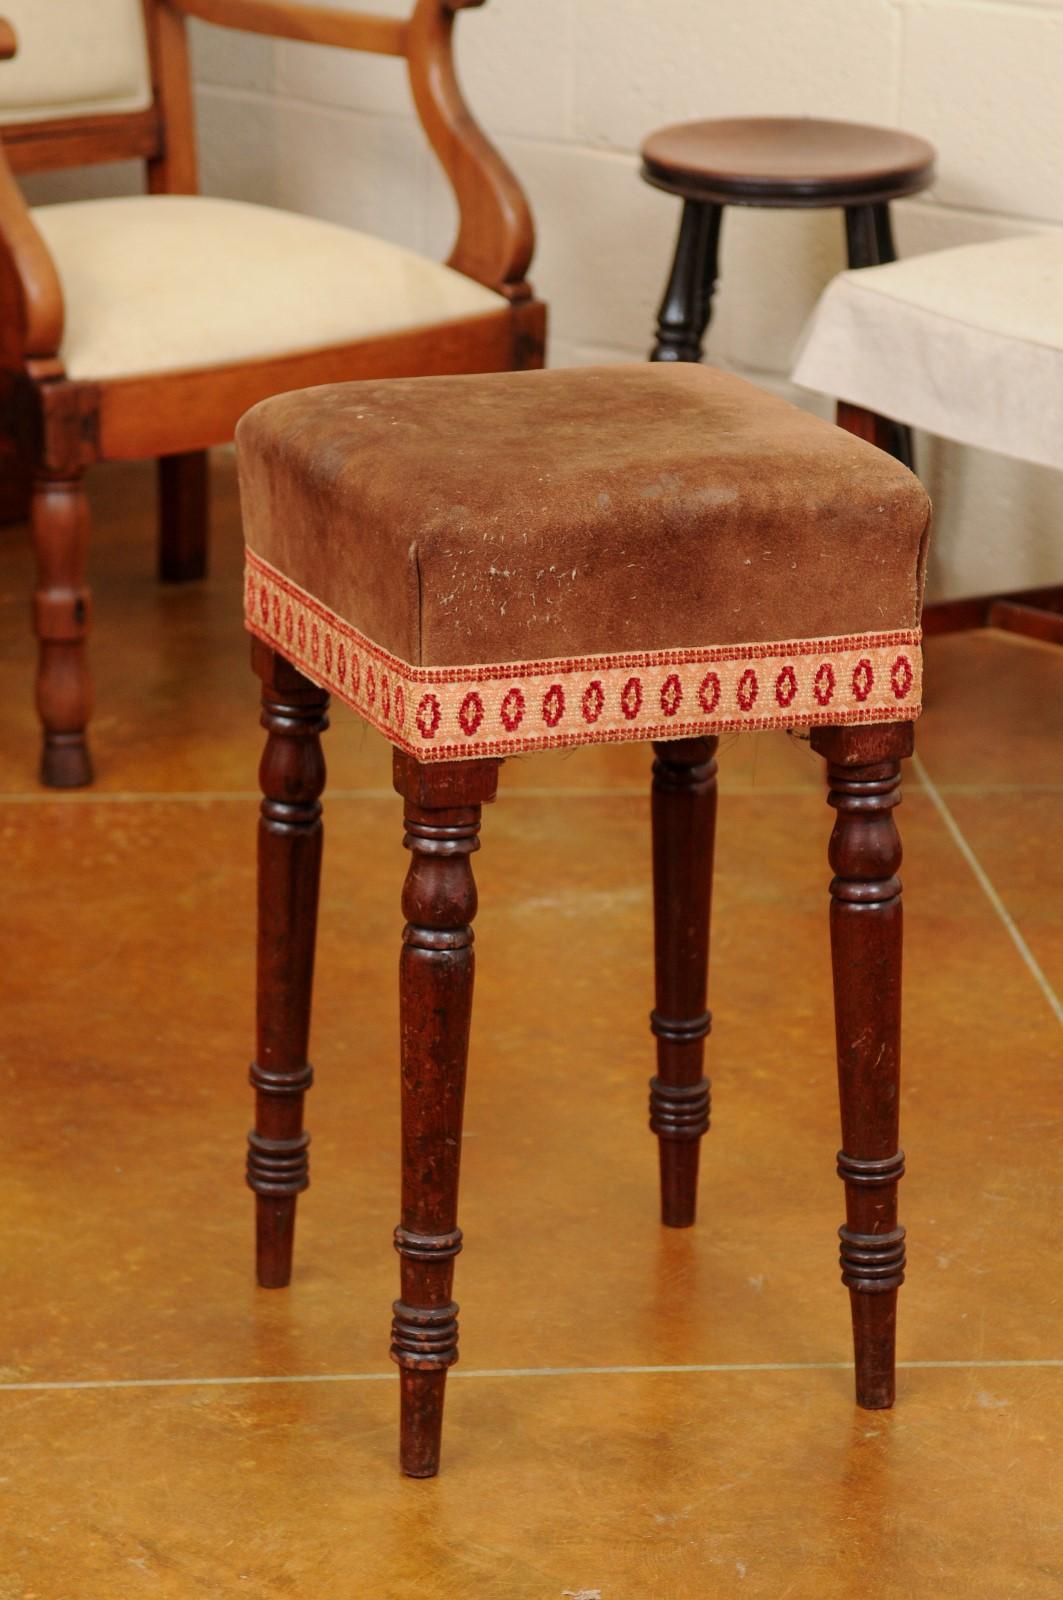 Early 19th Century English Mahogany Stool with Turned Legs & Suede Upholstery In Good Condition For Sale In Atlanta, GA